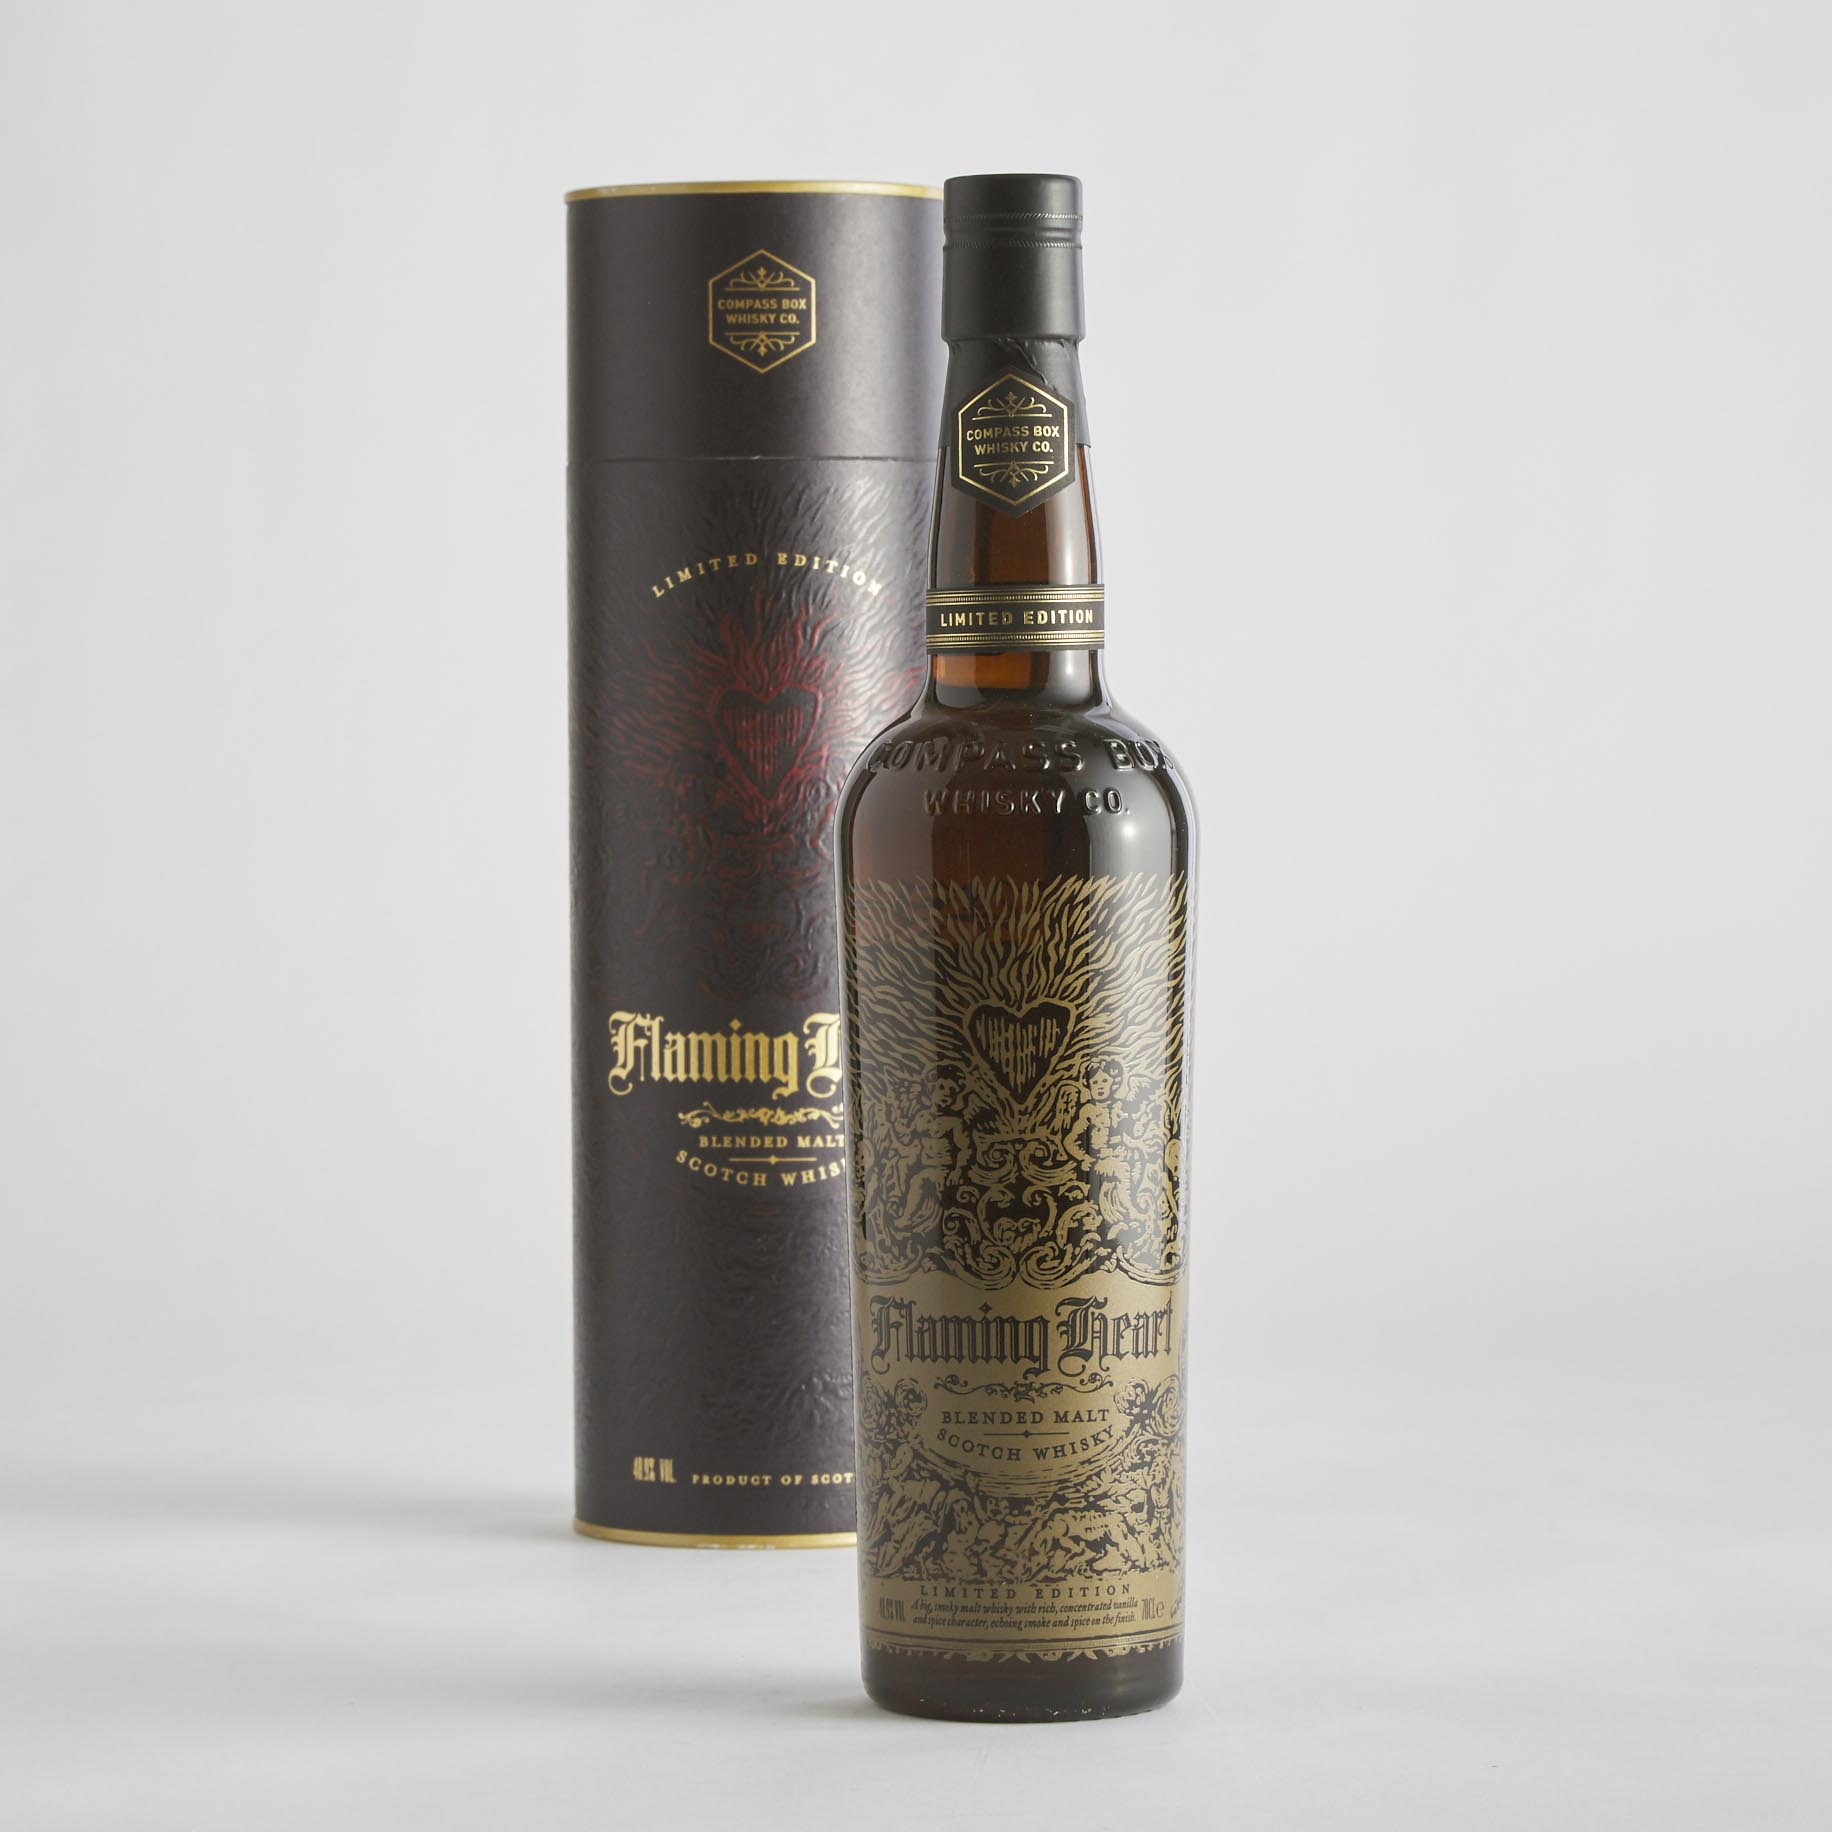 FLAMING HEART BLENDED MALT SCOTCH WHISKY NAS (ONE 70 CL)